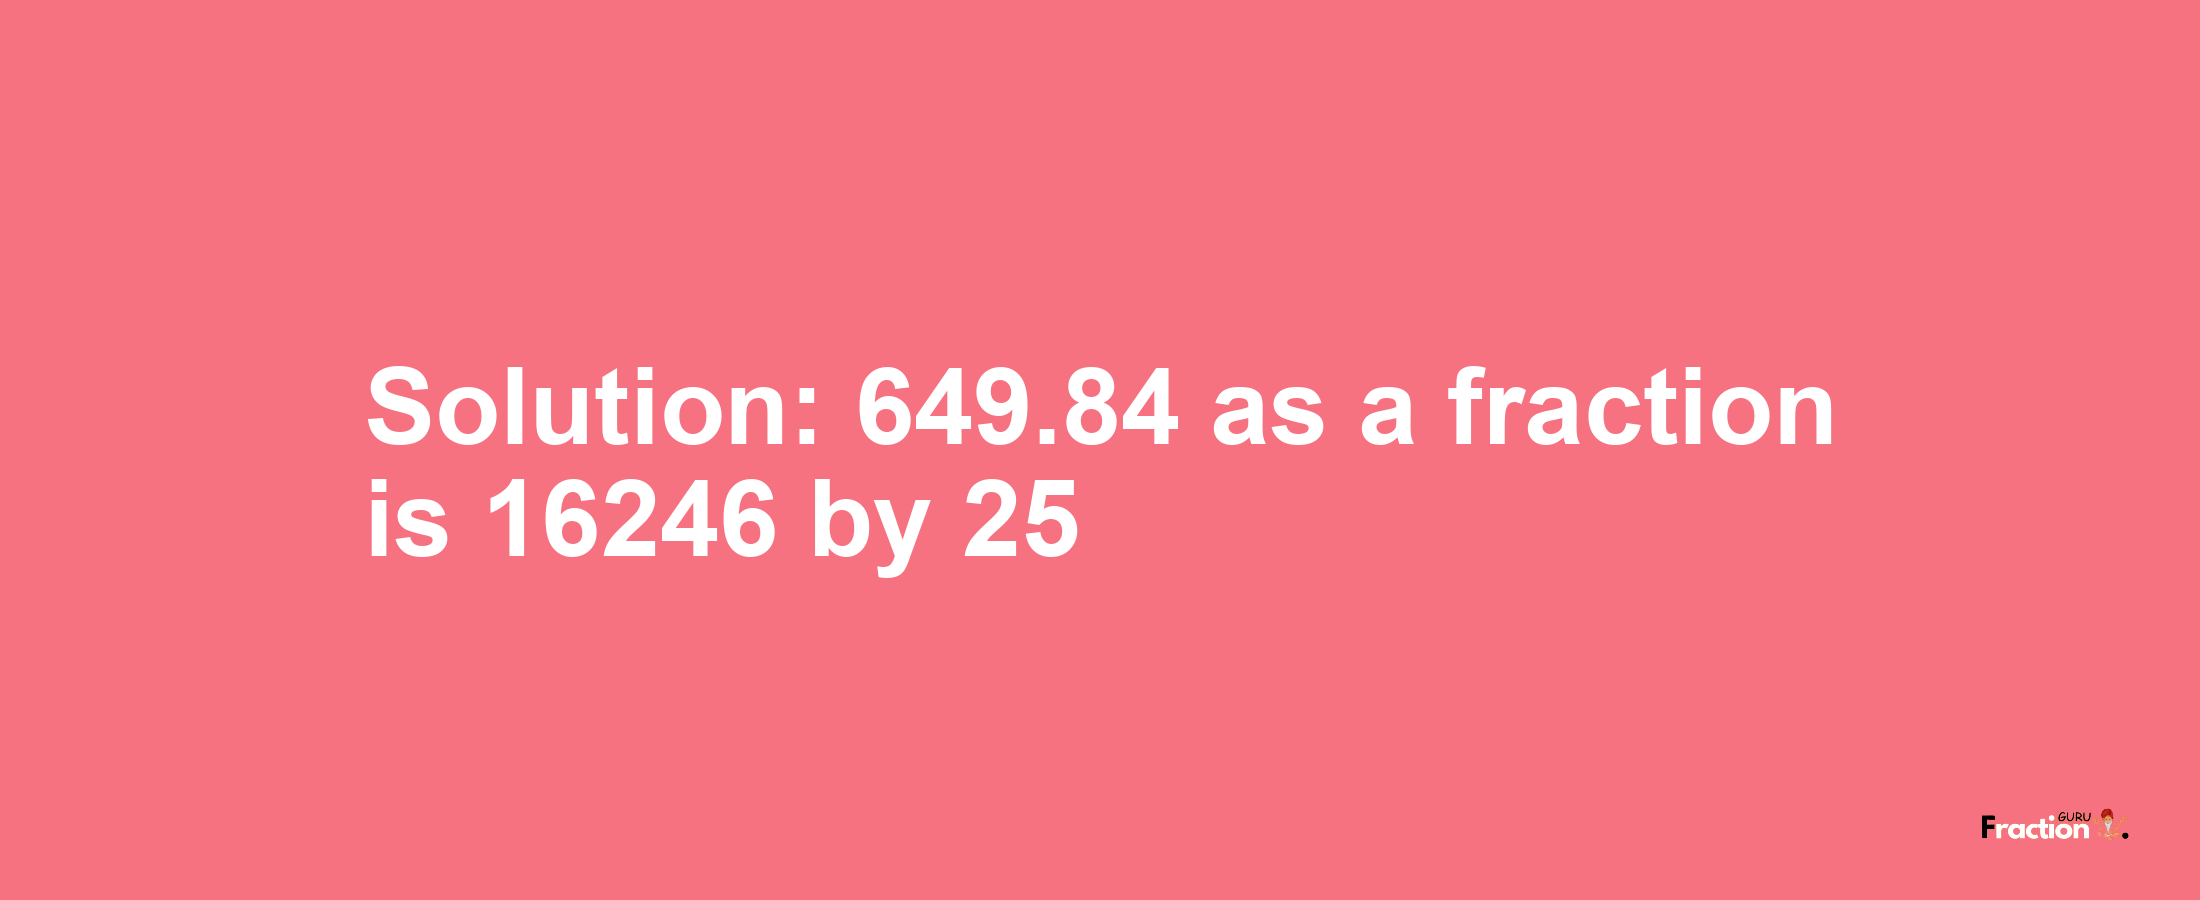 Solution:649.84 as a fraction is 16246/25